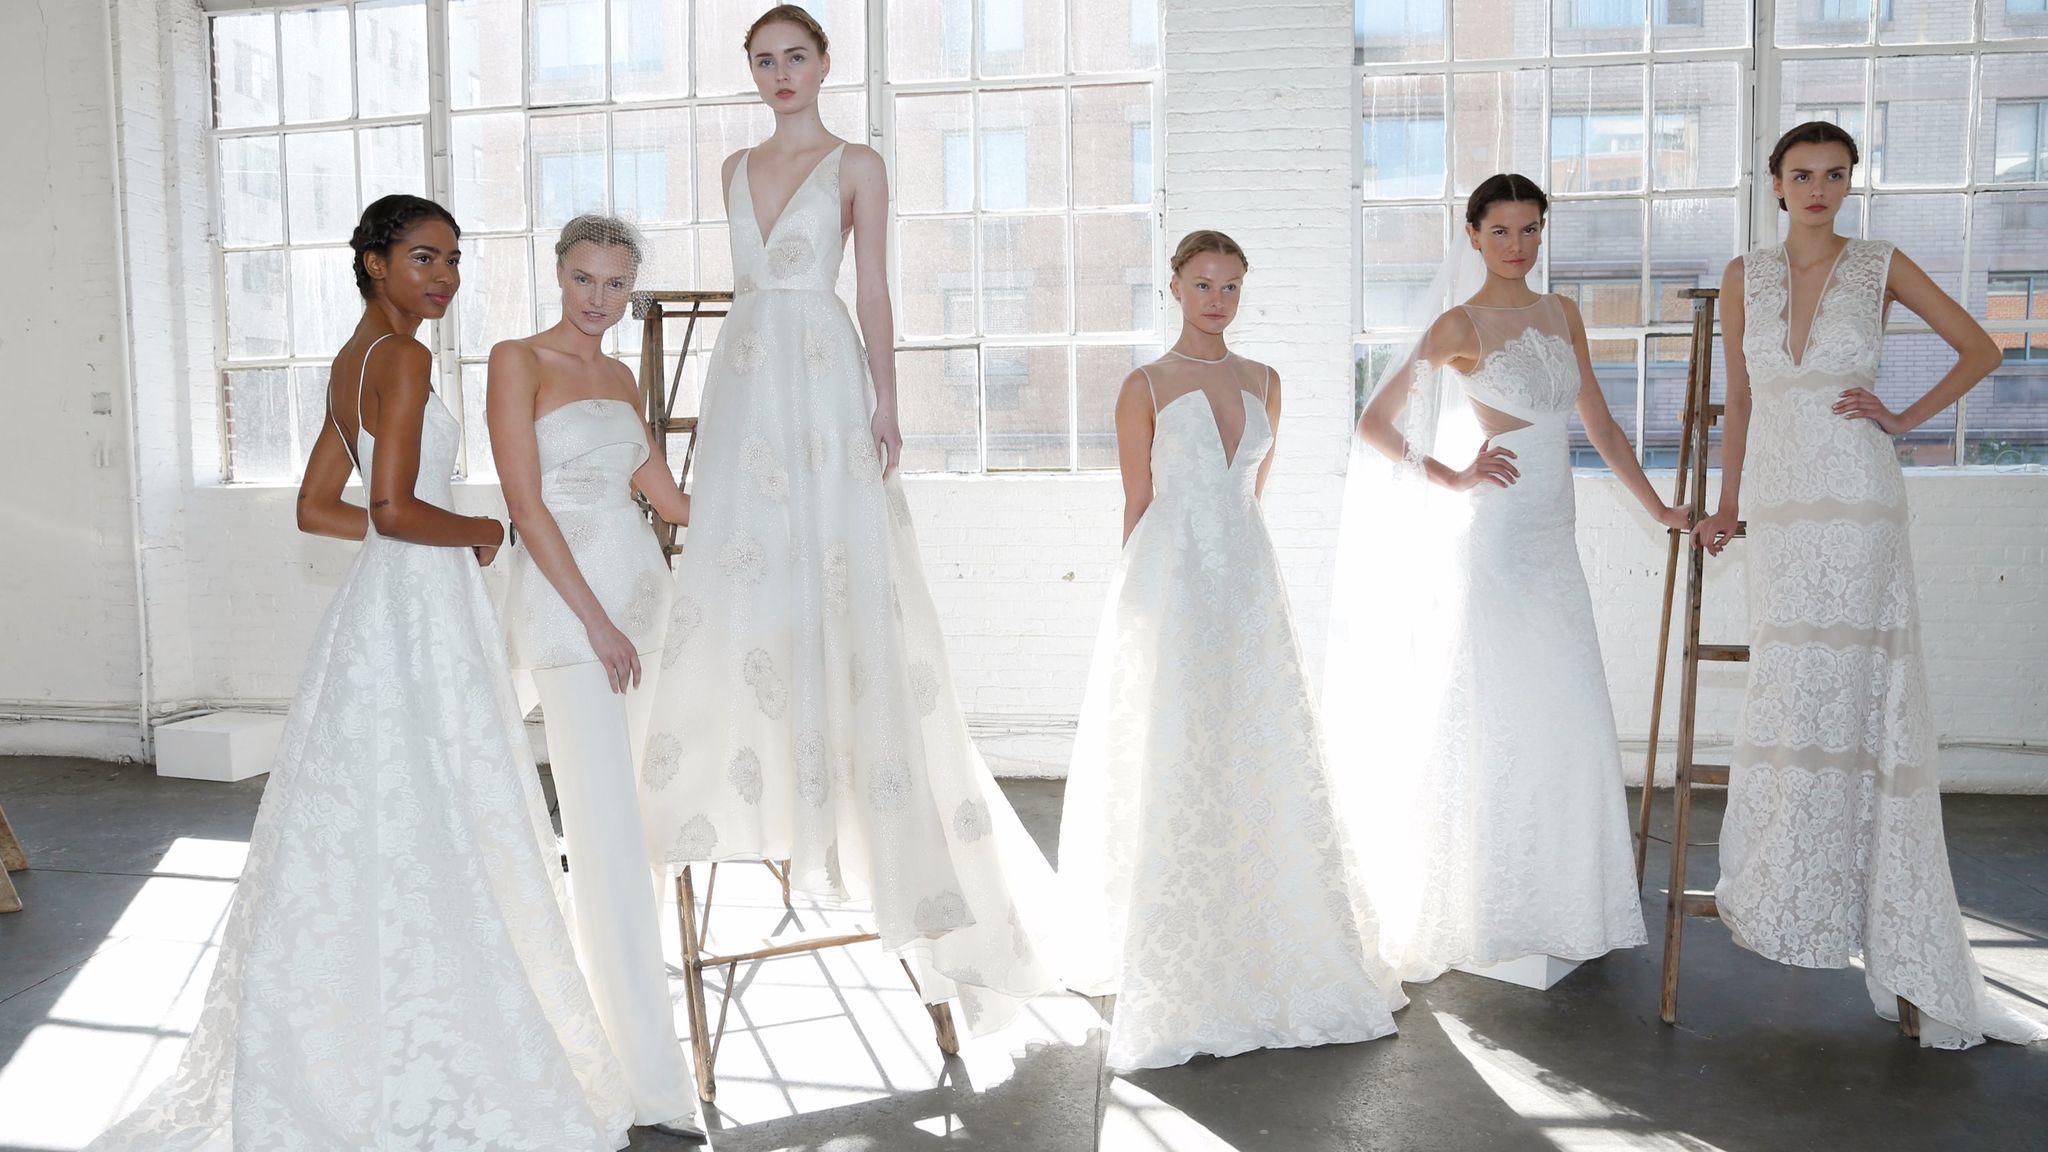 Monique Lhuillier, Elie Saab and other labels turn their attention to  dressing the bride